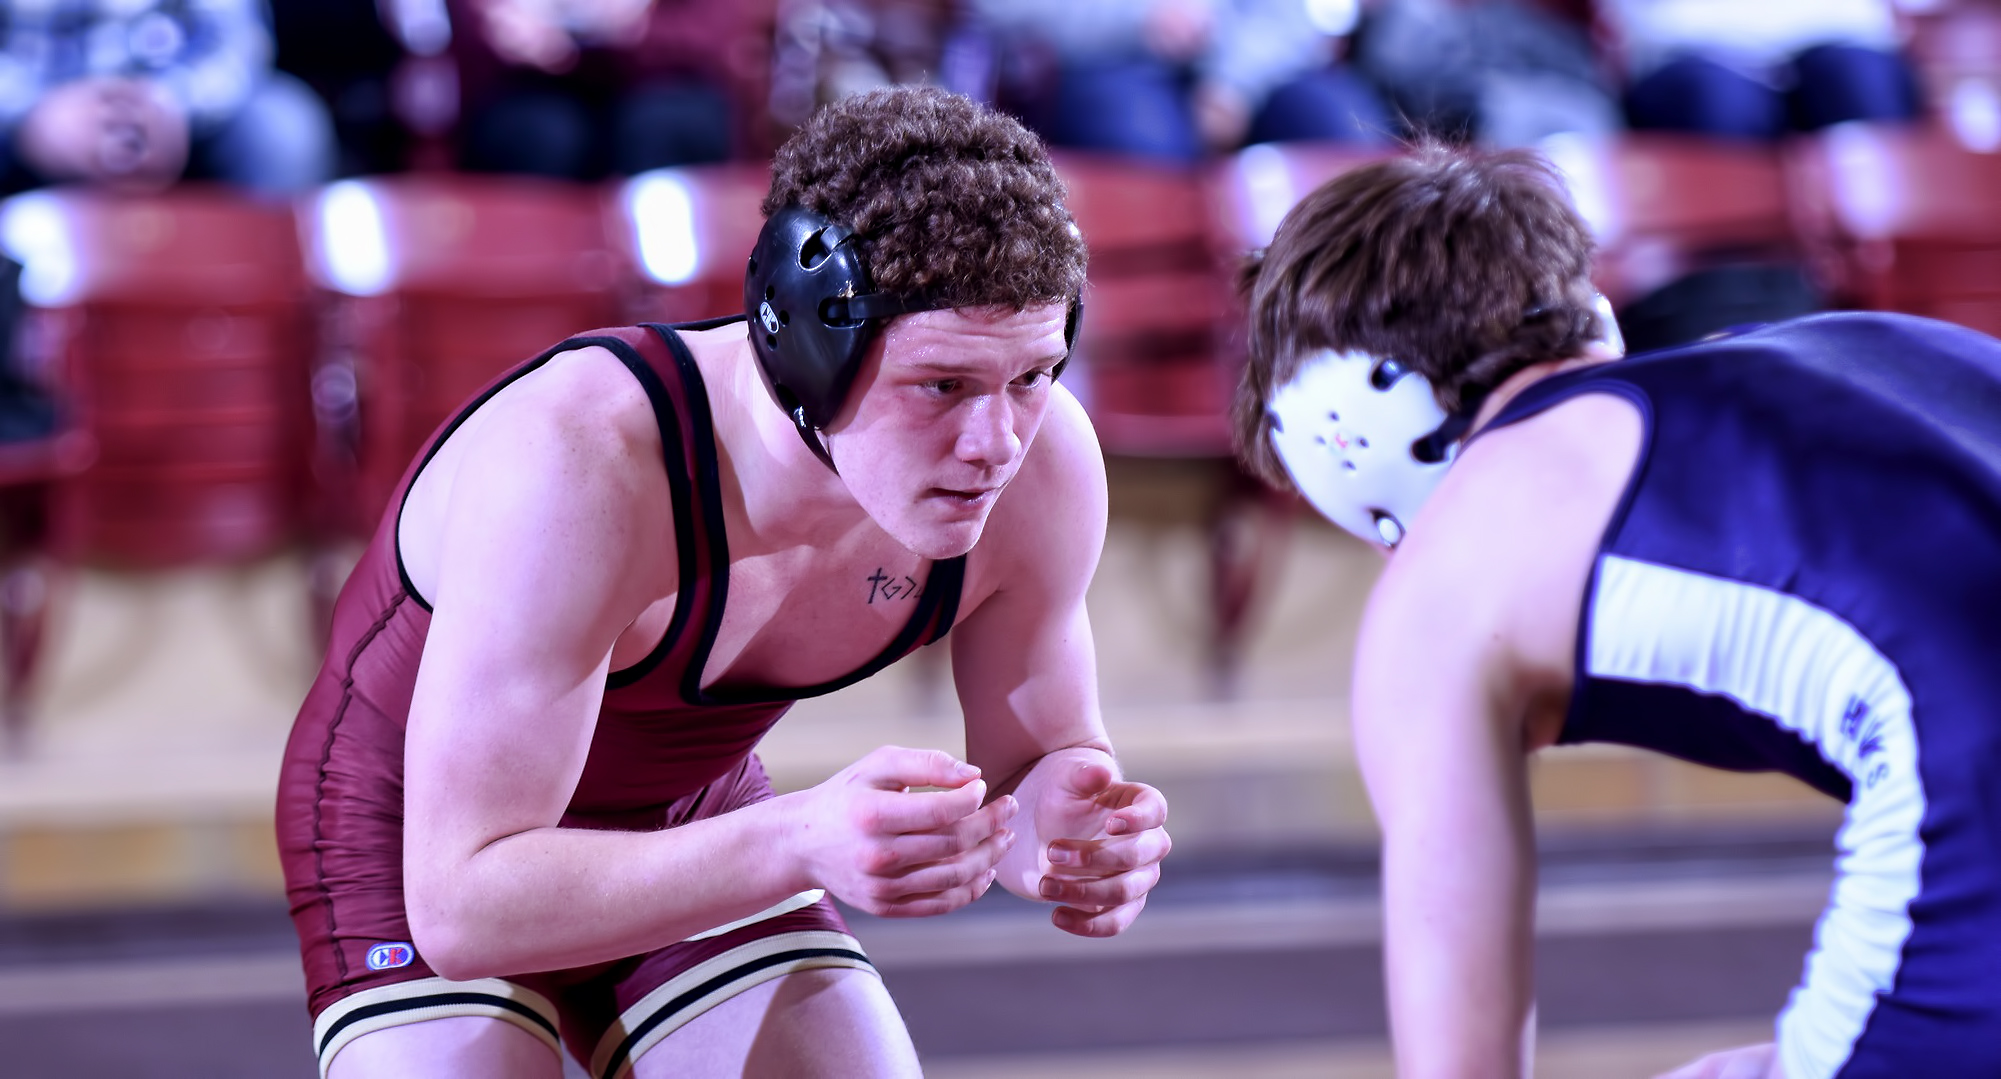 Jacob Prunty is ranked 10th in the 133-lb weight class in the latest D3wrestling.com national rankings.